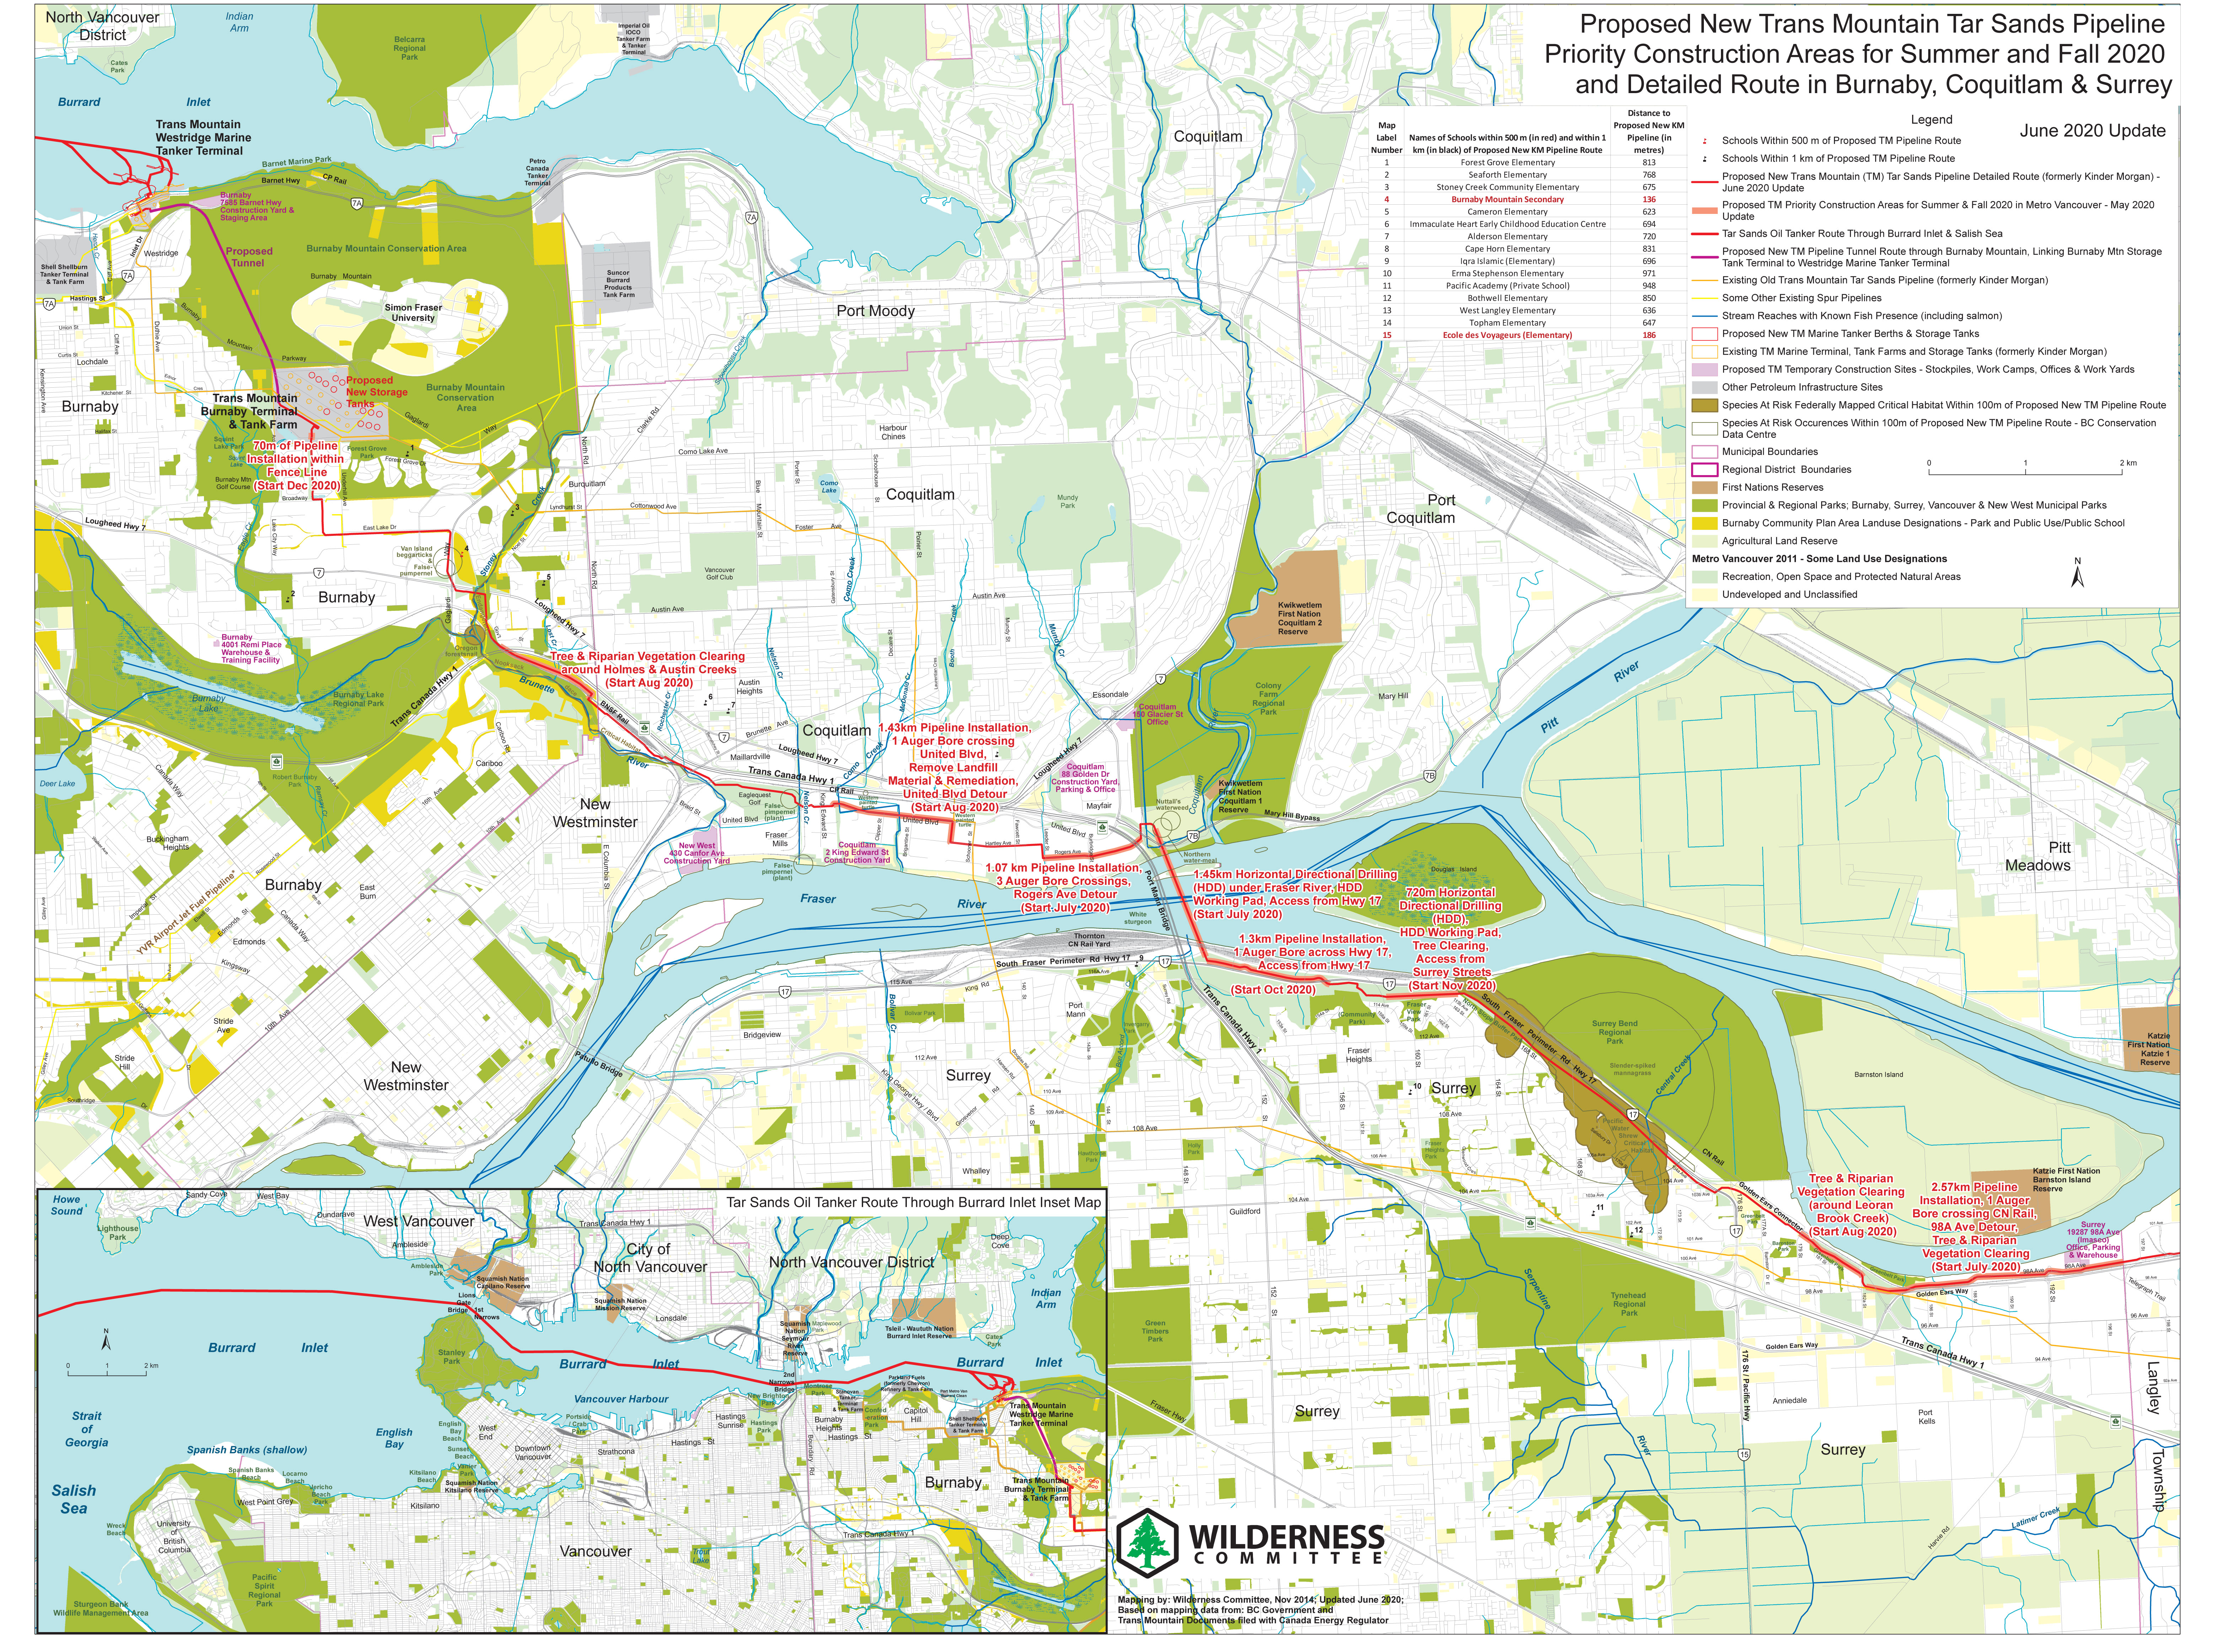 Map of Trans Mountain Priority Construction Areas for Summer Fall 2020 and Pipeline Route in Burnaby, Coquitlam and Surrey - June 2020 version